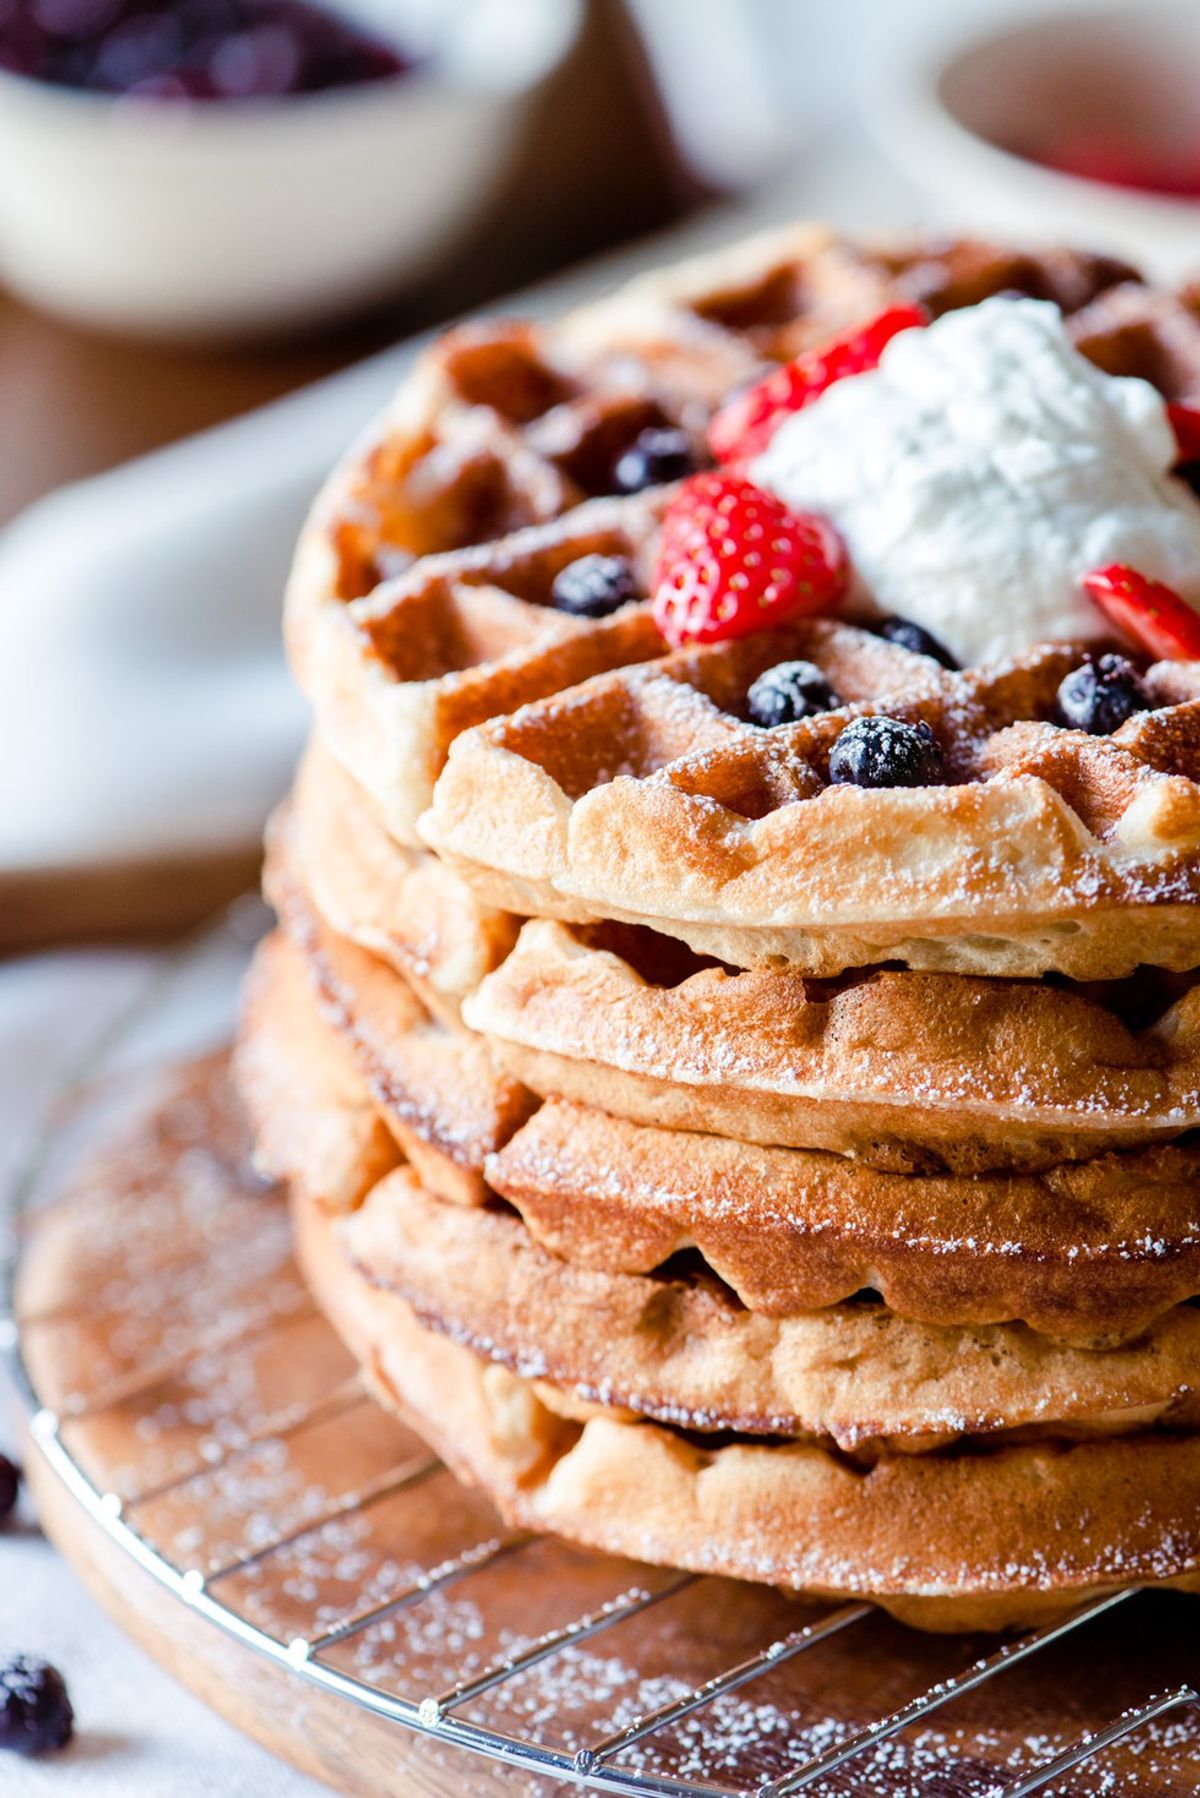 10 Reasons Why Waffles Are Superior To Pancakes